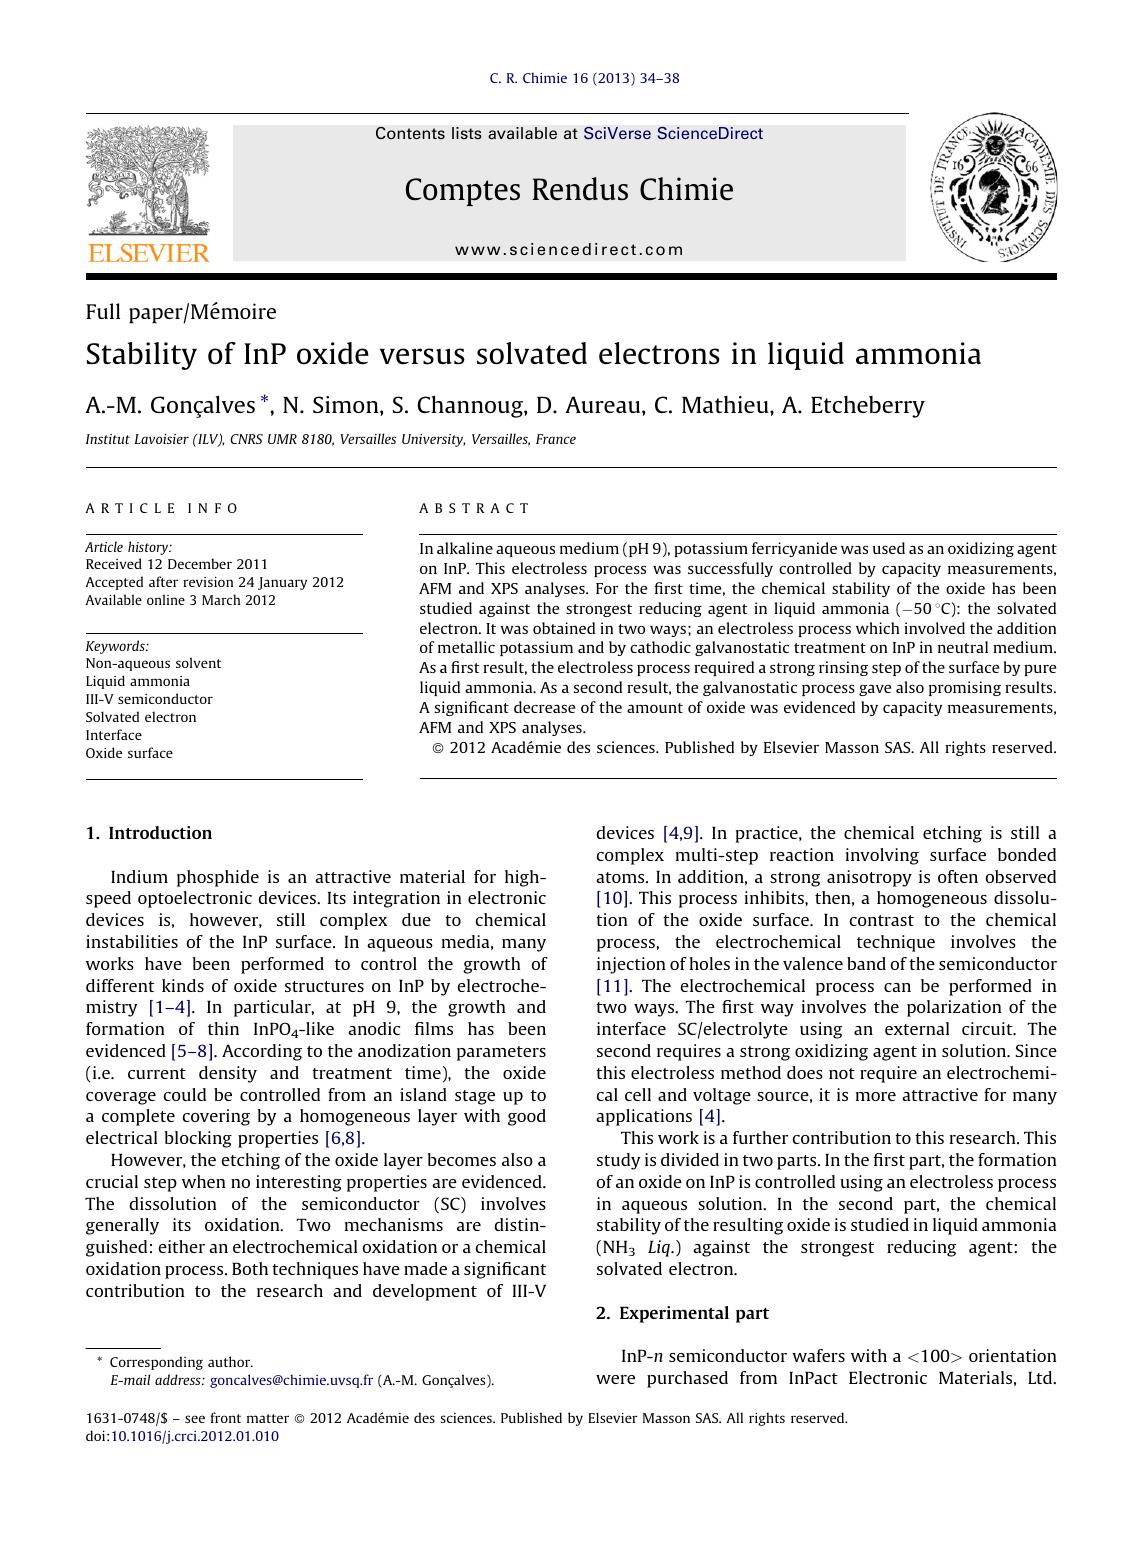 Stability of InP oxide versus solvated electrons in liquid ammonia by A.-M. Gonçalves